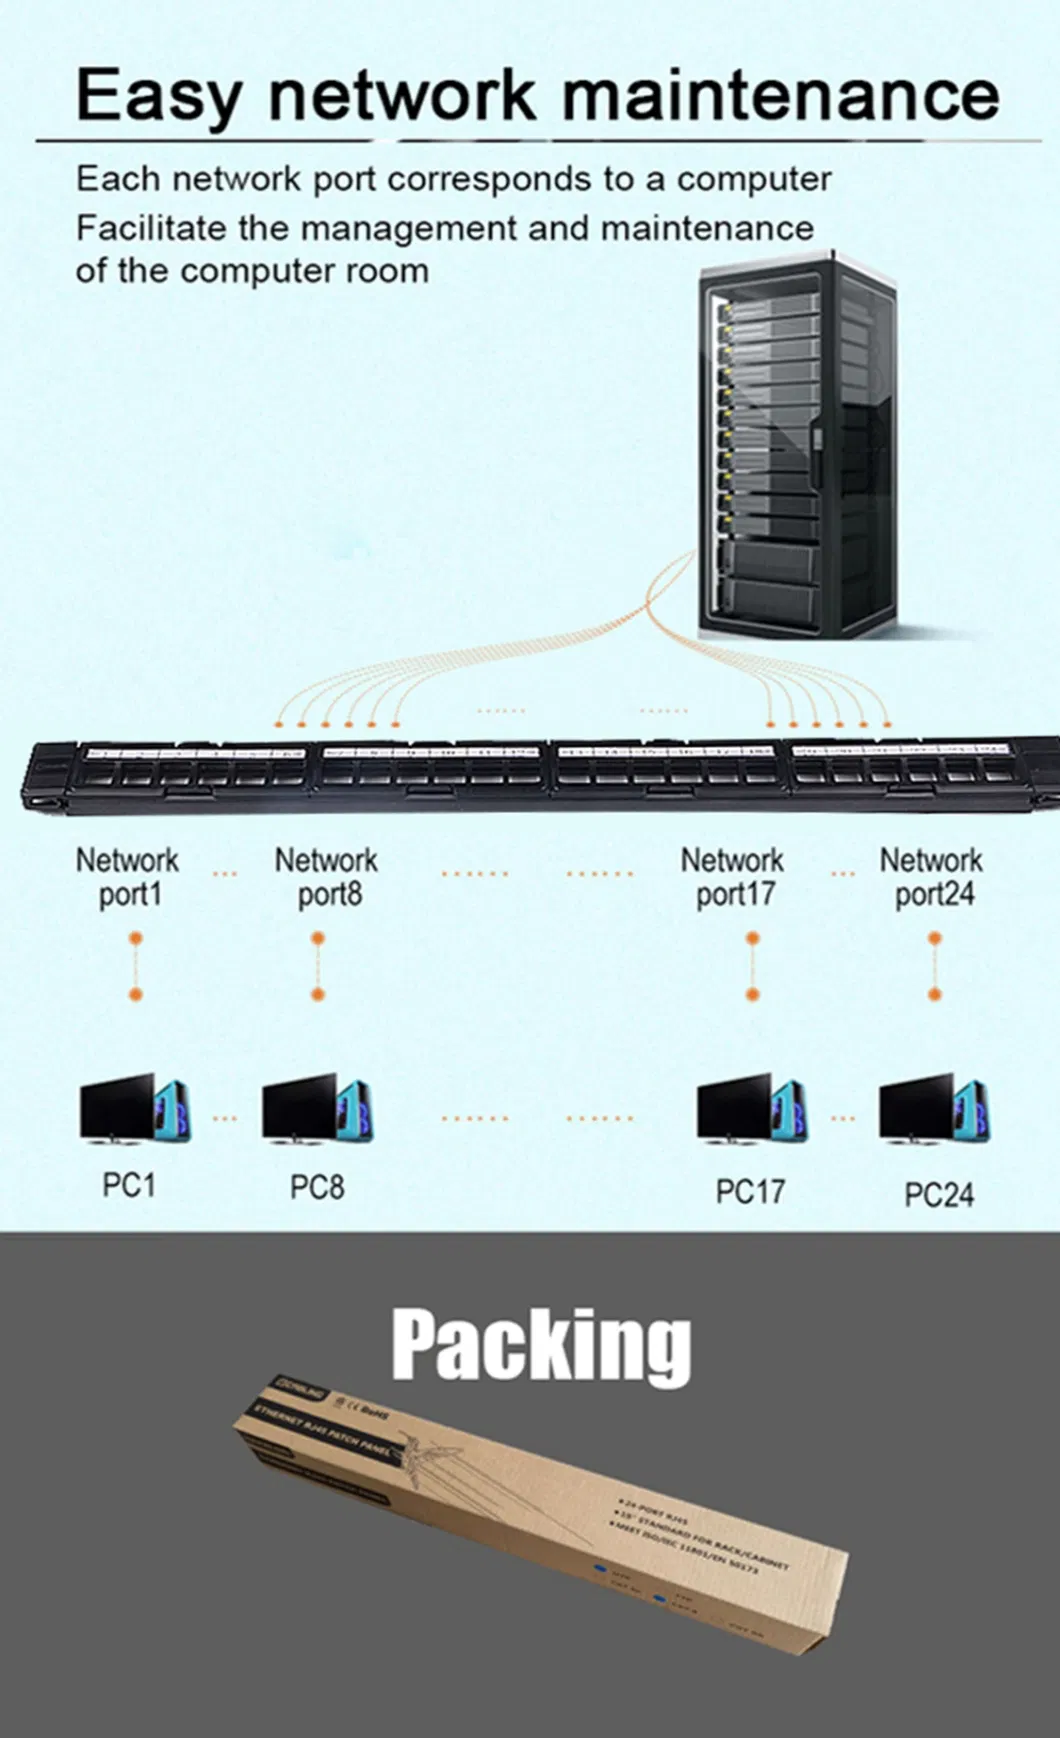 Gcabling 19 Inch 24port Snap in Keystone Blank RJ45 Feed Through Patch Panel Cat5e CAT6 CAT6A Modular Rack Mount Keystone Patch Panel with Rear Cable Management